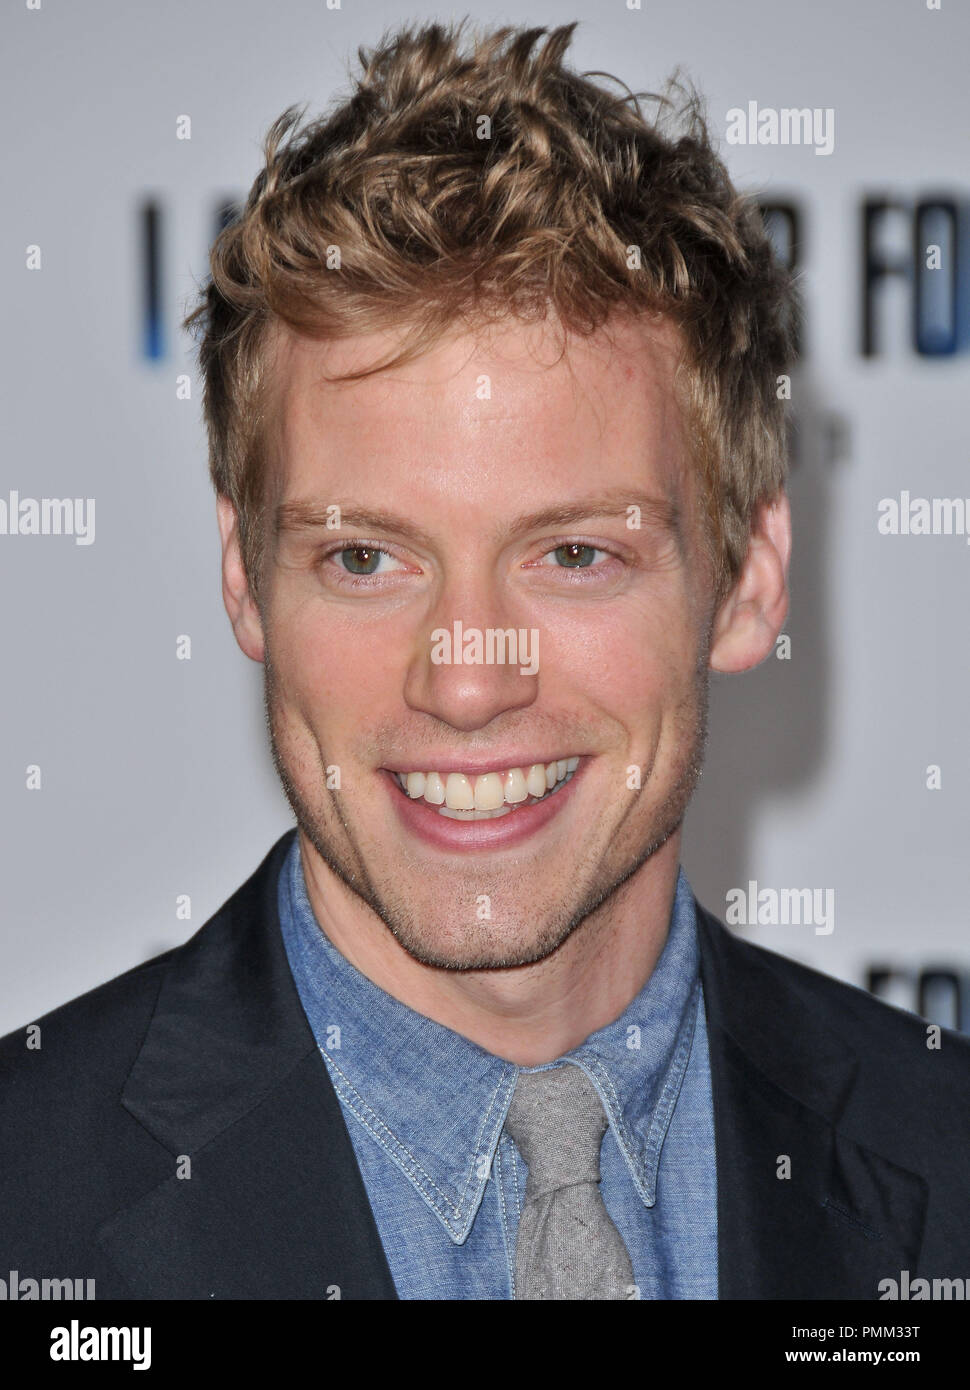 Barrett Foa at the Los Angeles Premiere of 'I Am Number Four' held at the Village Theatre in Westwood, CA. The event took place on Wednesday, February 9, 2011.Photo by PRPP Pacific Rim Photo Press / PictureLux Stock Photo